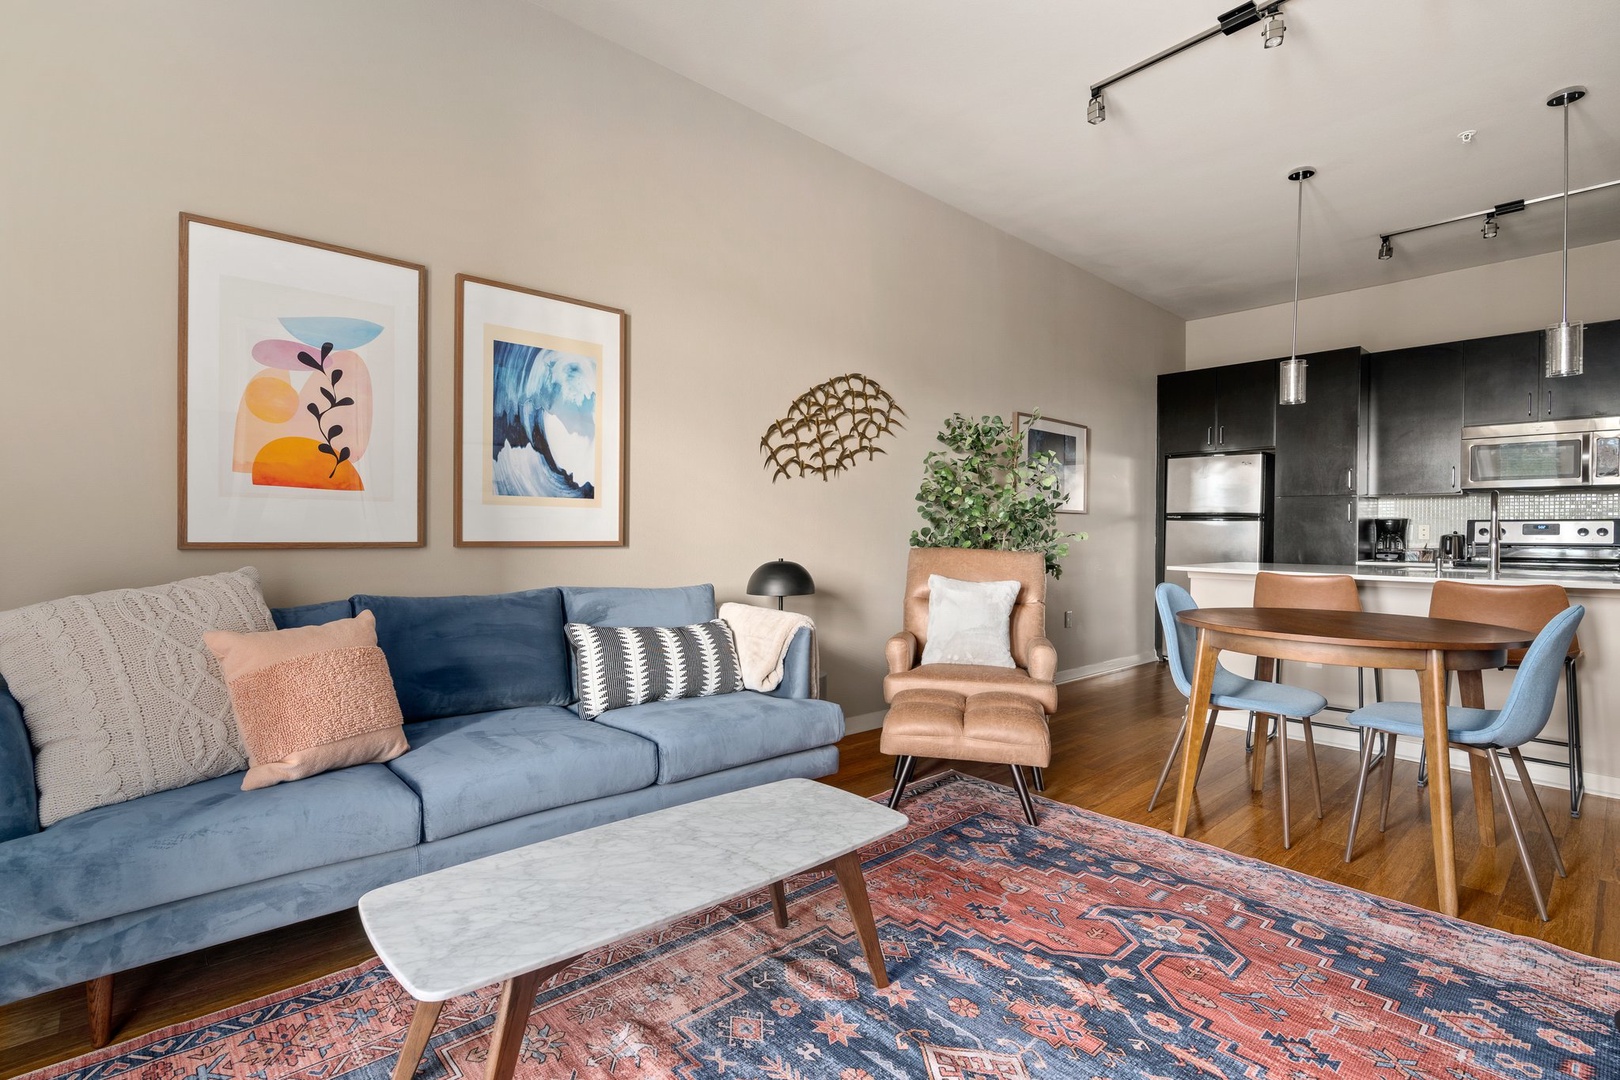 Savor your time in this stylish and cozy contemporary living space.